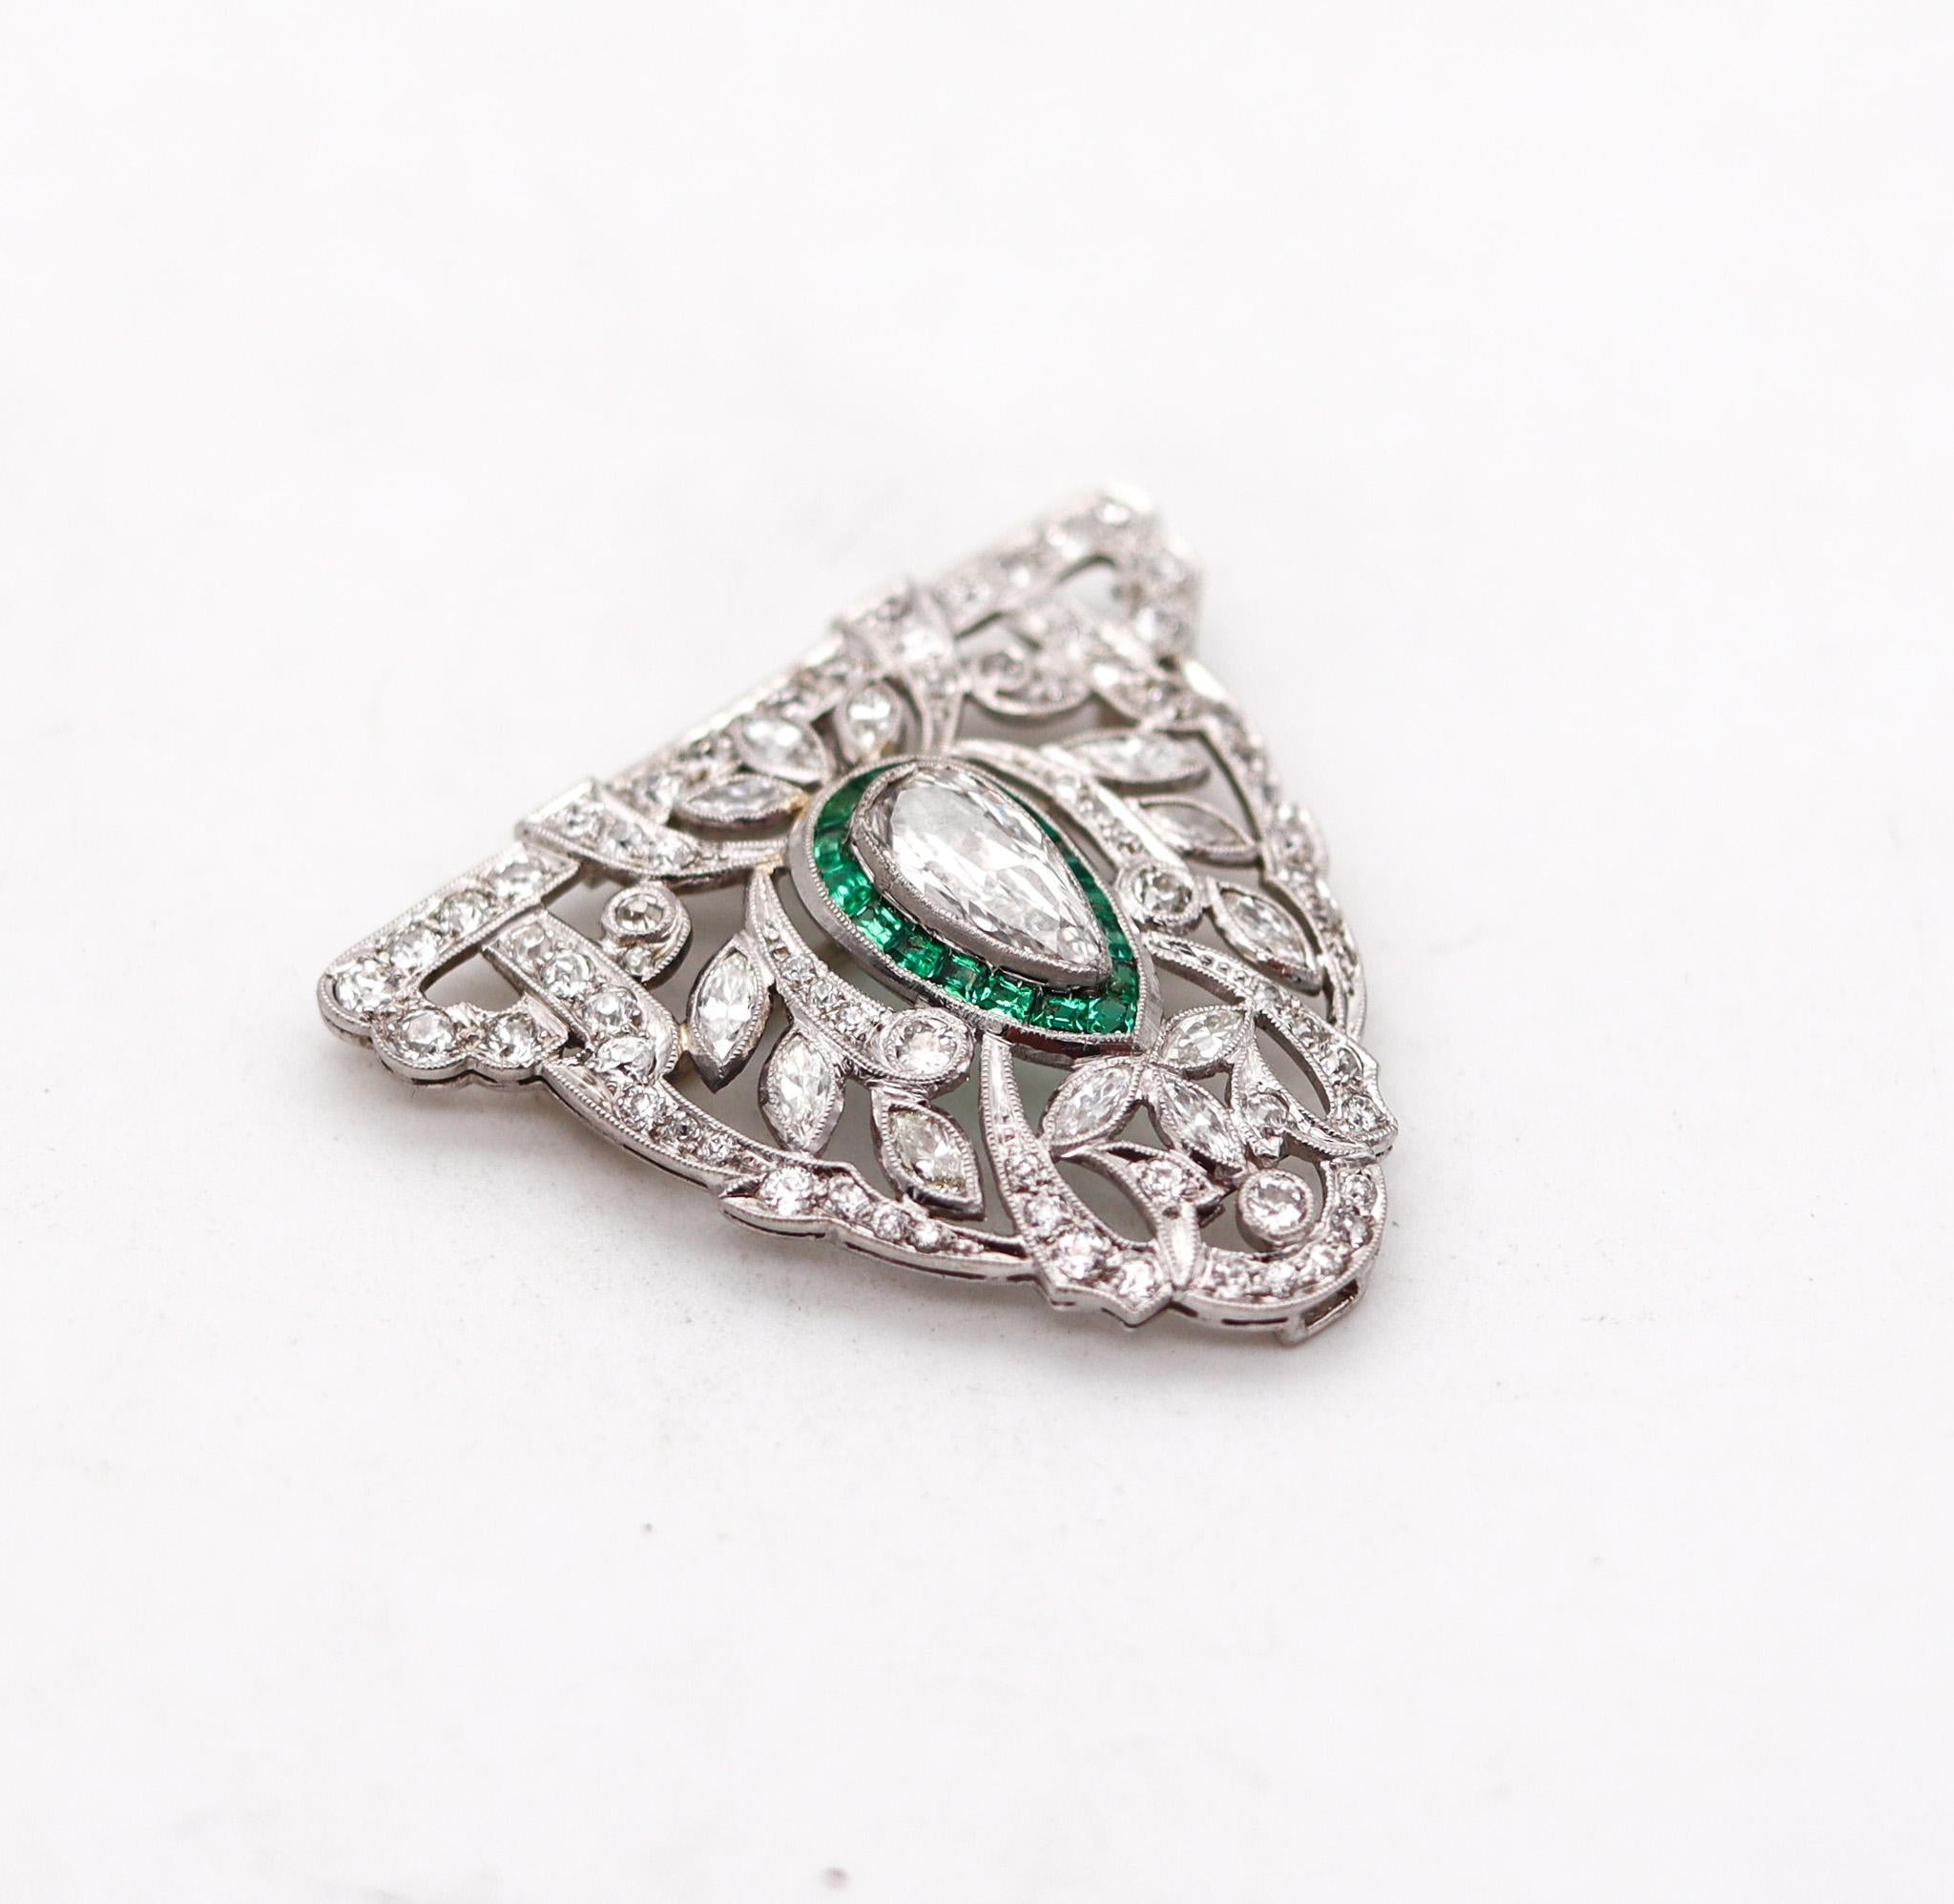 An art deco convertible pendant brooch.

Beautiful piece, created during the American Art Deco period, back in the 1930. This convertible pendant-brooch, was carefully crafted with geometric patterns in solid .900/.999 platinum. The back of this